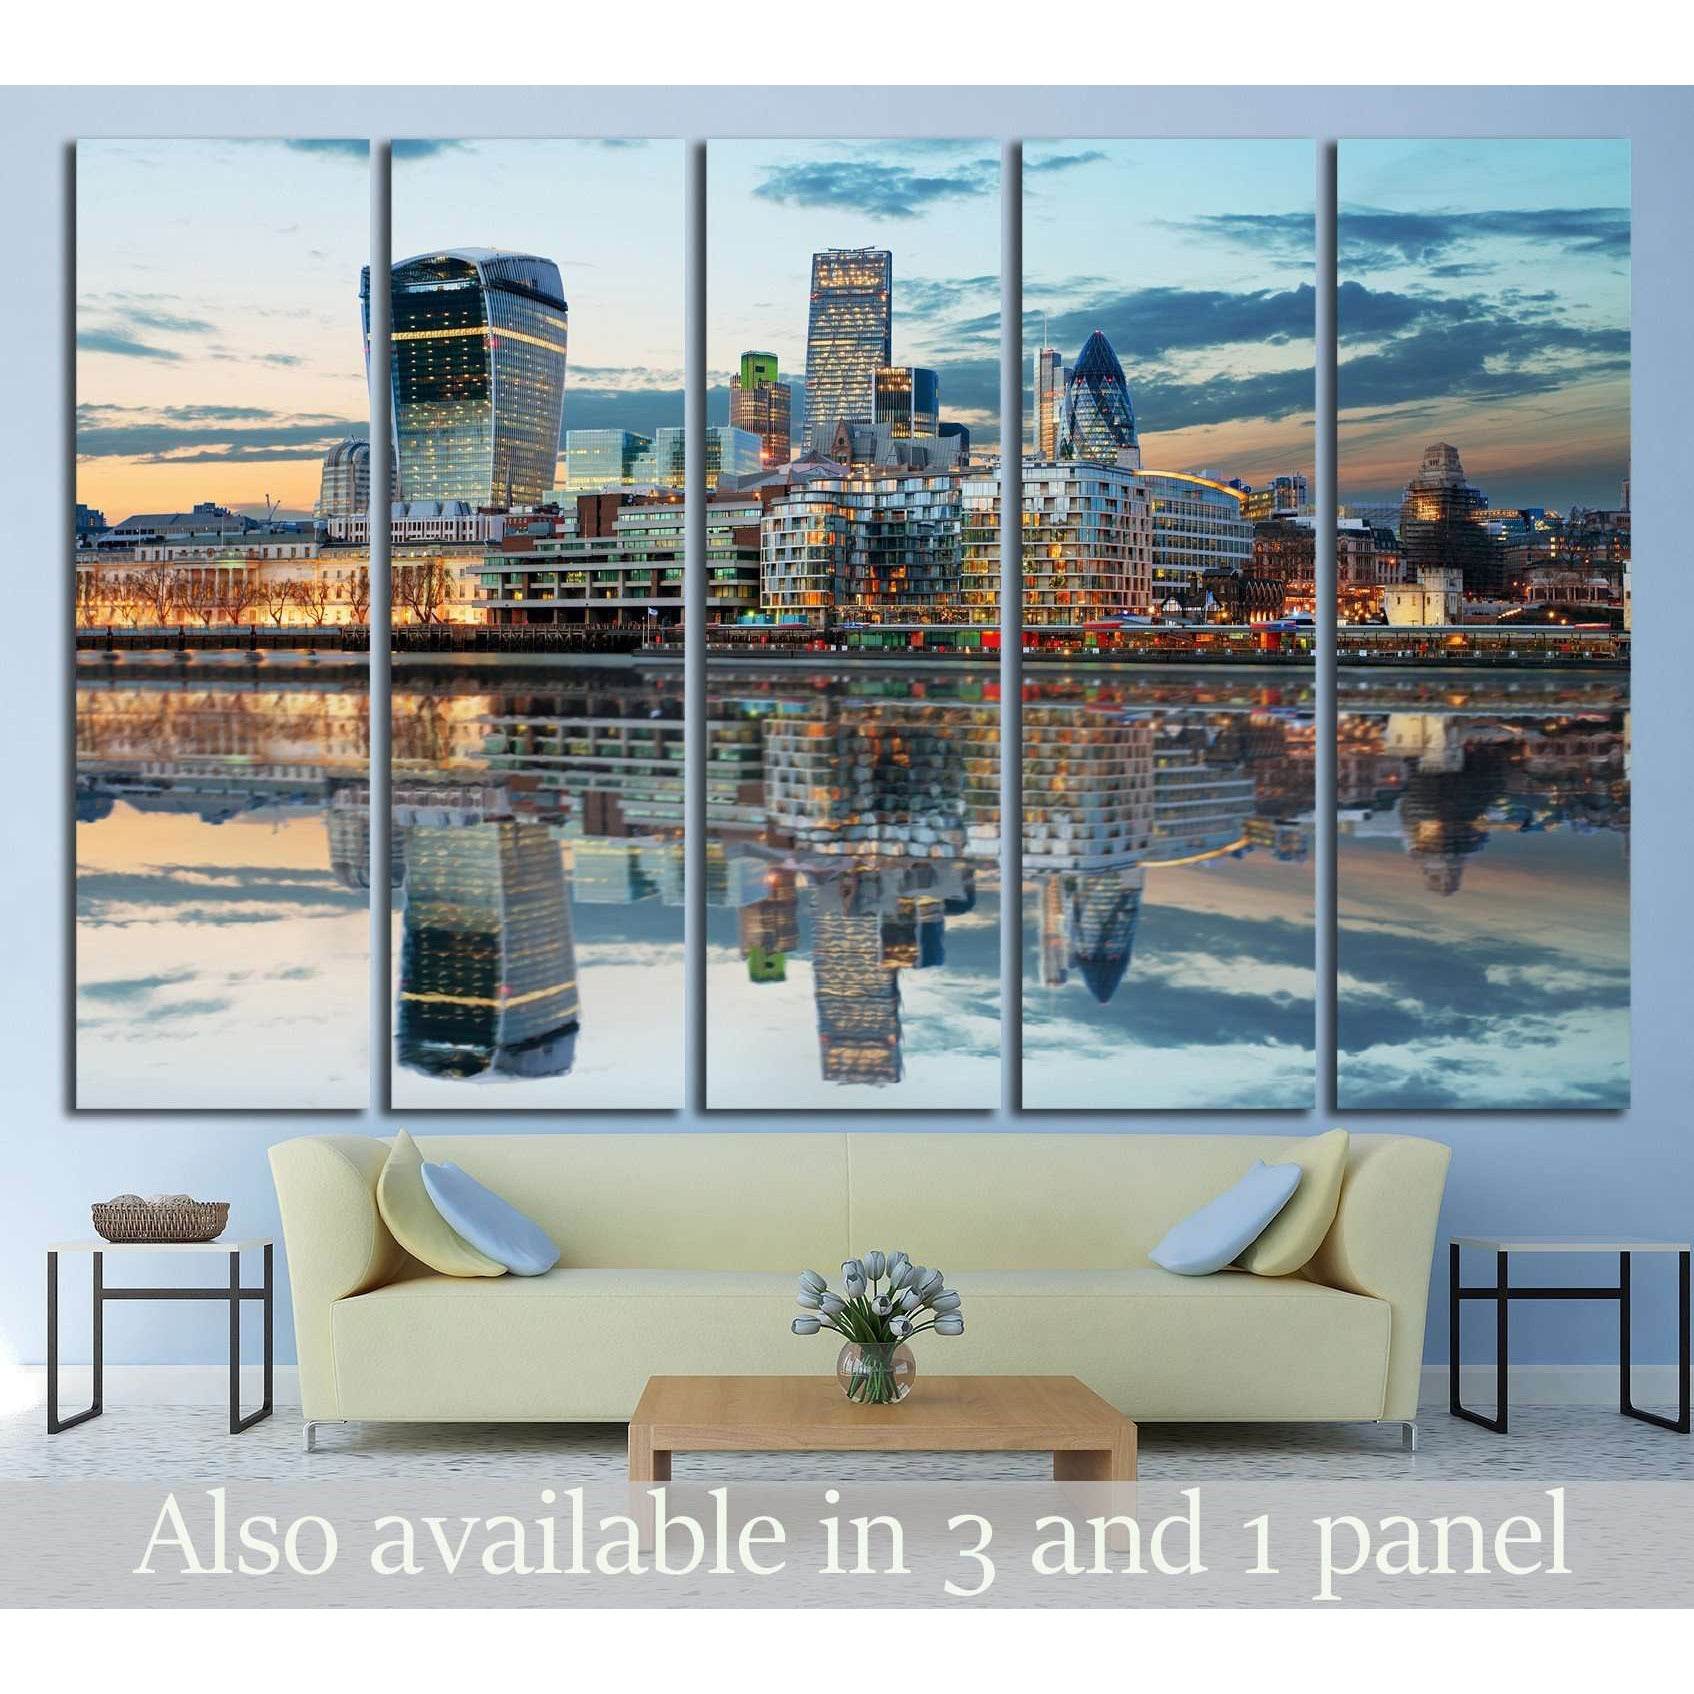 London Skylines №571 Ready to Hang Canvas Print